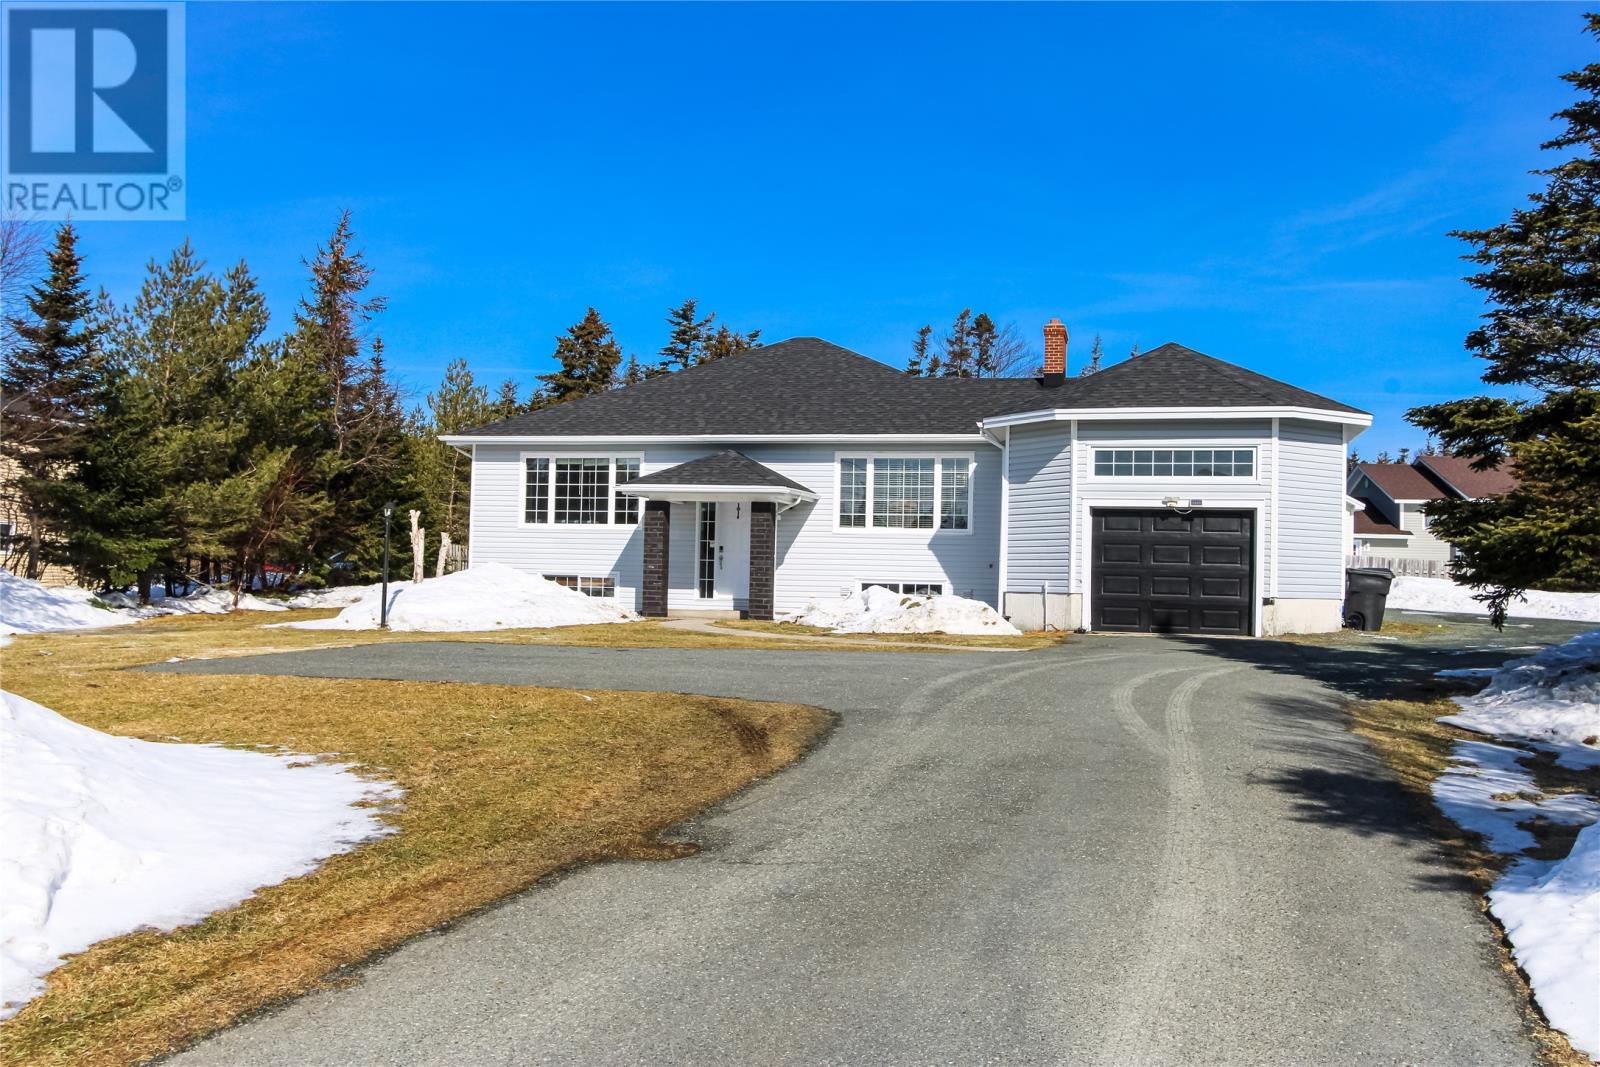 1090 Thorburn Road, Portugal Cove-St. Philips, A1M1T5, 4 Bedrooms Bedrooms, ,3 BathroomsBathrooms,Single Family,For sale,Thorburn,1268440